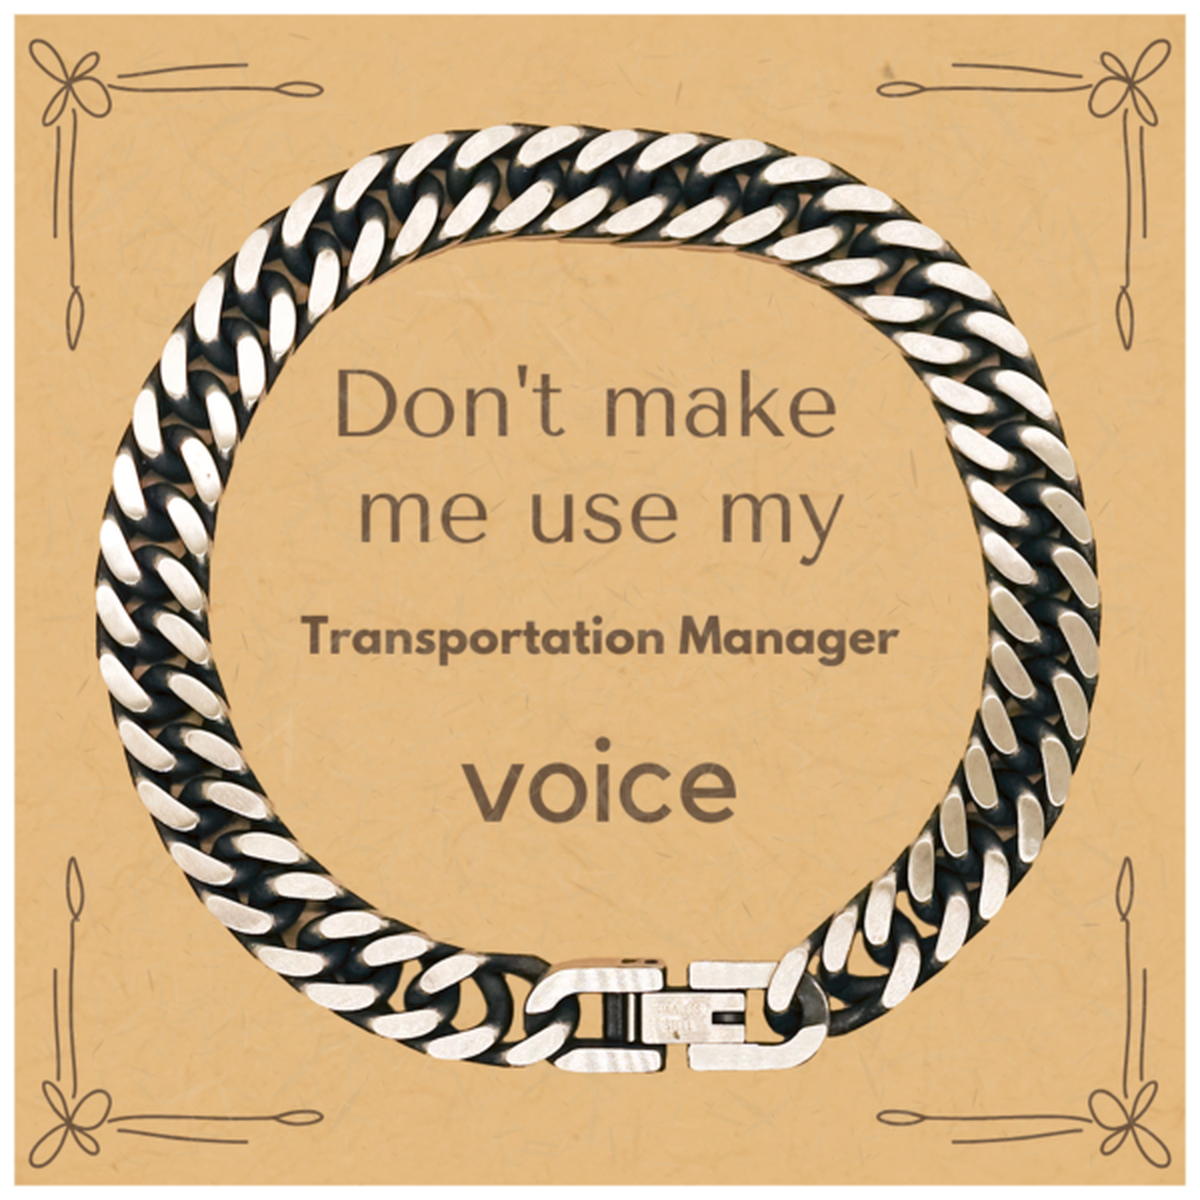 Don't make me use my Transportation Manager voice, Sarcasm Transportation Manager Card Gifts, Christmas Transportation Manager Cuban Link Chain Bracelet Birthday Unique Gifts For Transportation Manager Coworkers, Men, Women, Colleague, Friends